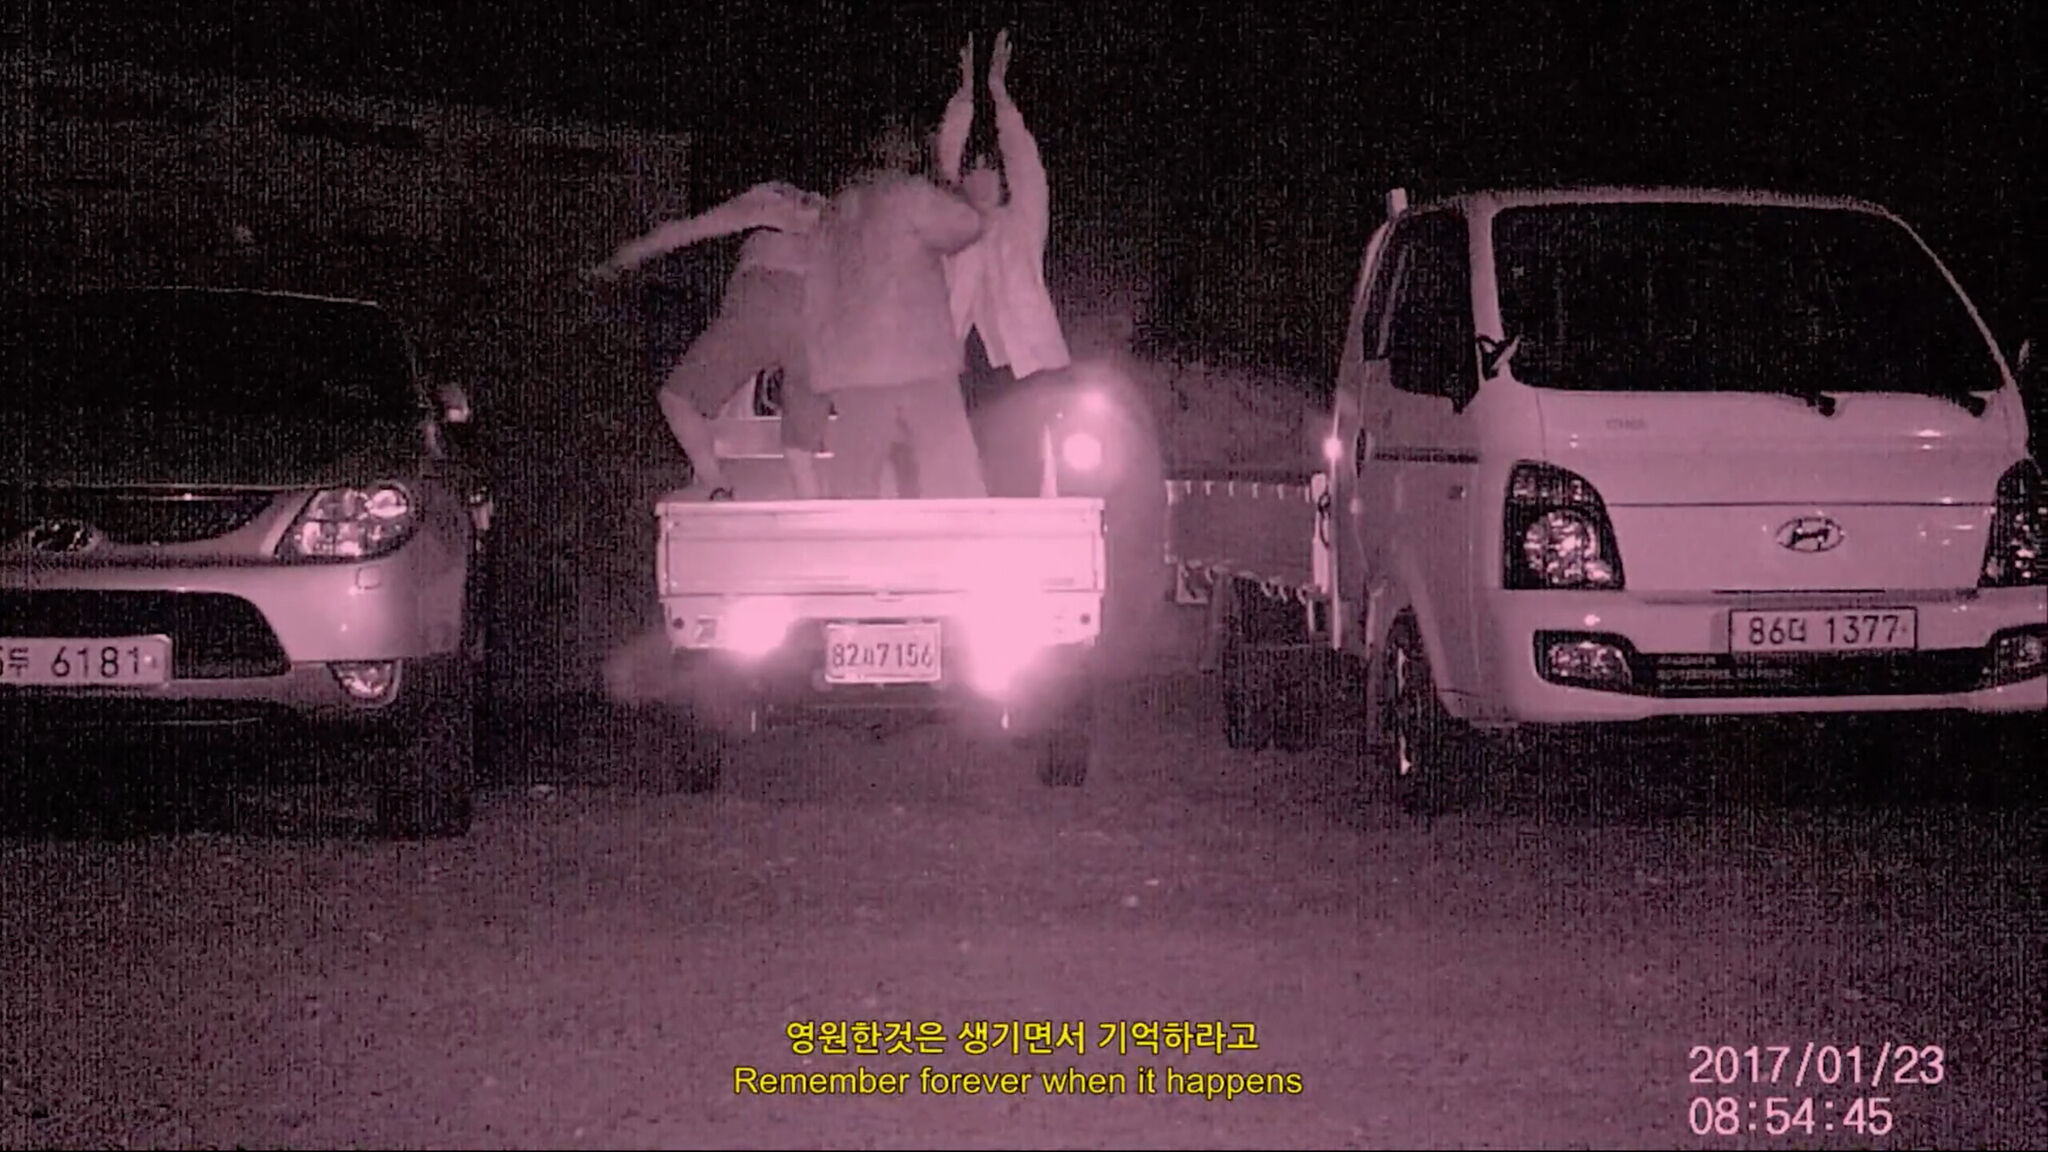 Pink-tinted image of three parked cars, with three people dancing in the back of a pickup truck. The time stamp in the bottom right corner reads "2017/01/23 08:54:45".